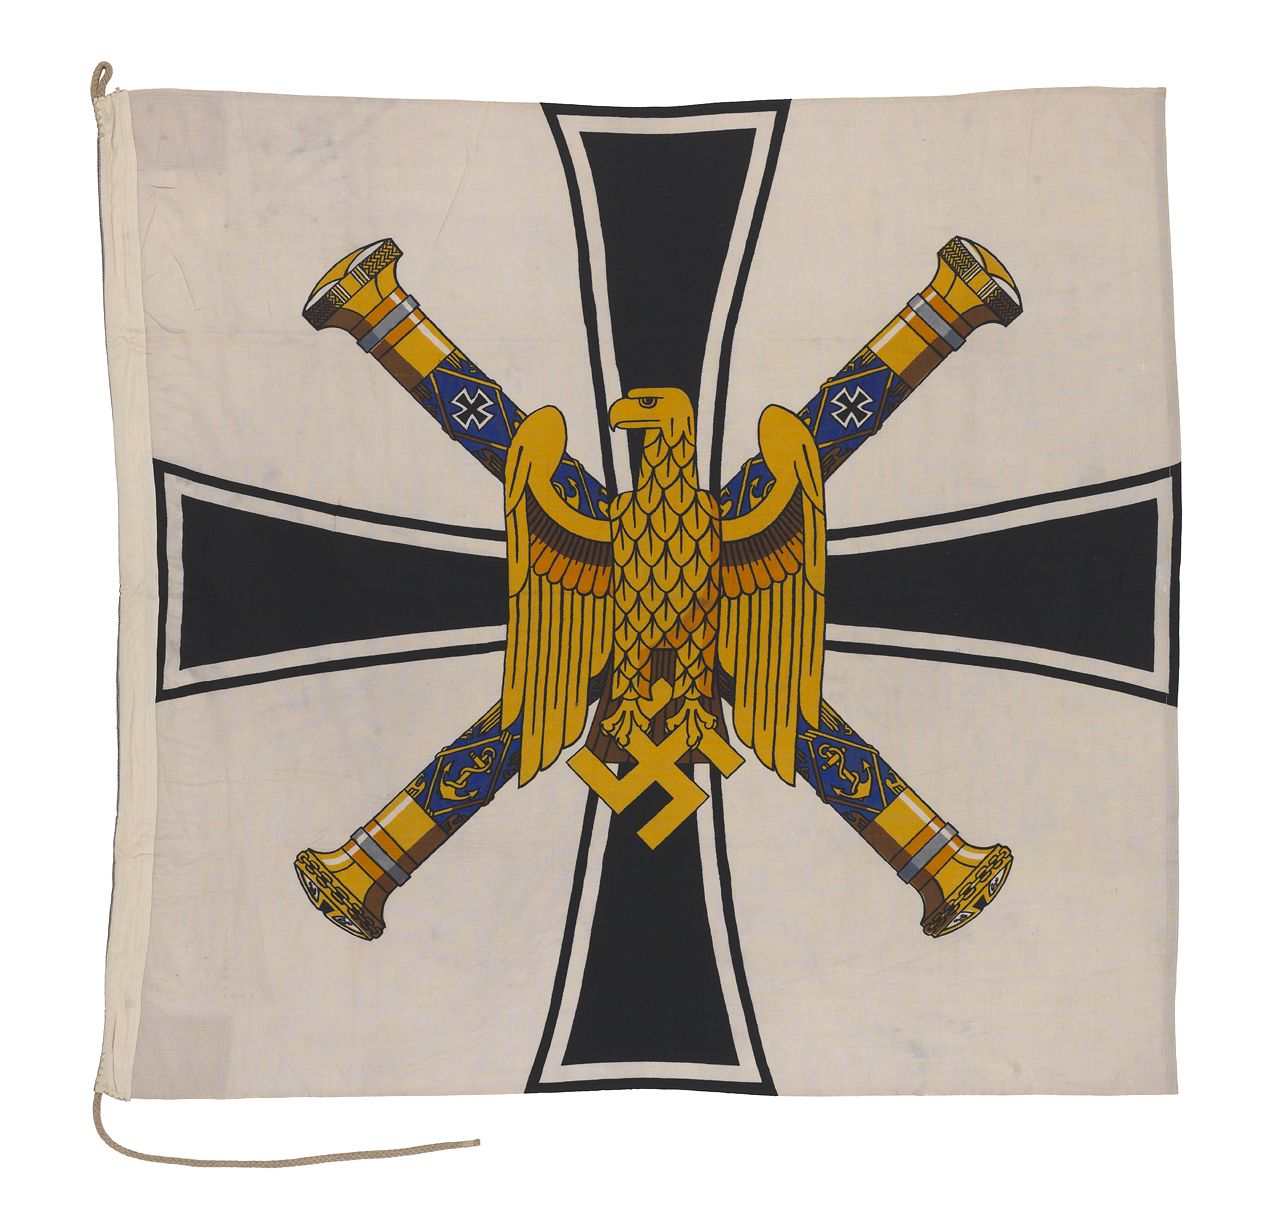 This nautical flag from Nazi-era Germany features two crossed admiral's batons, and an eagle holding the swastika. 